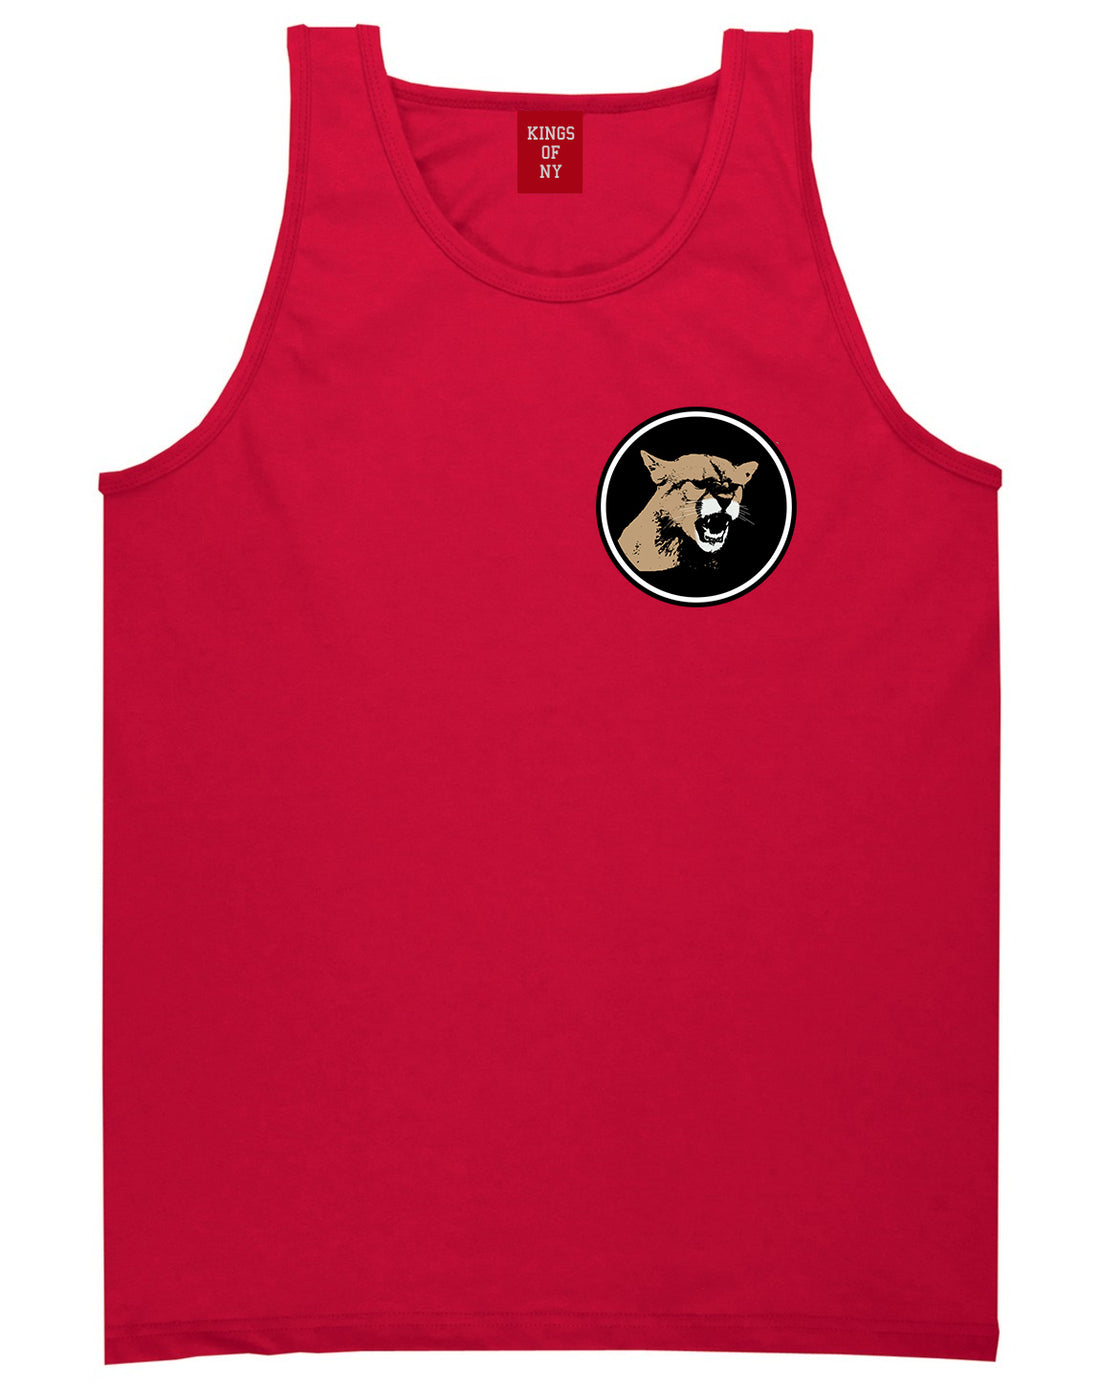 Angry Cougar Chest Red Tank Top Shirt by Kings Of NY